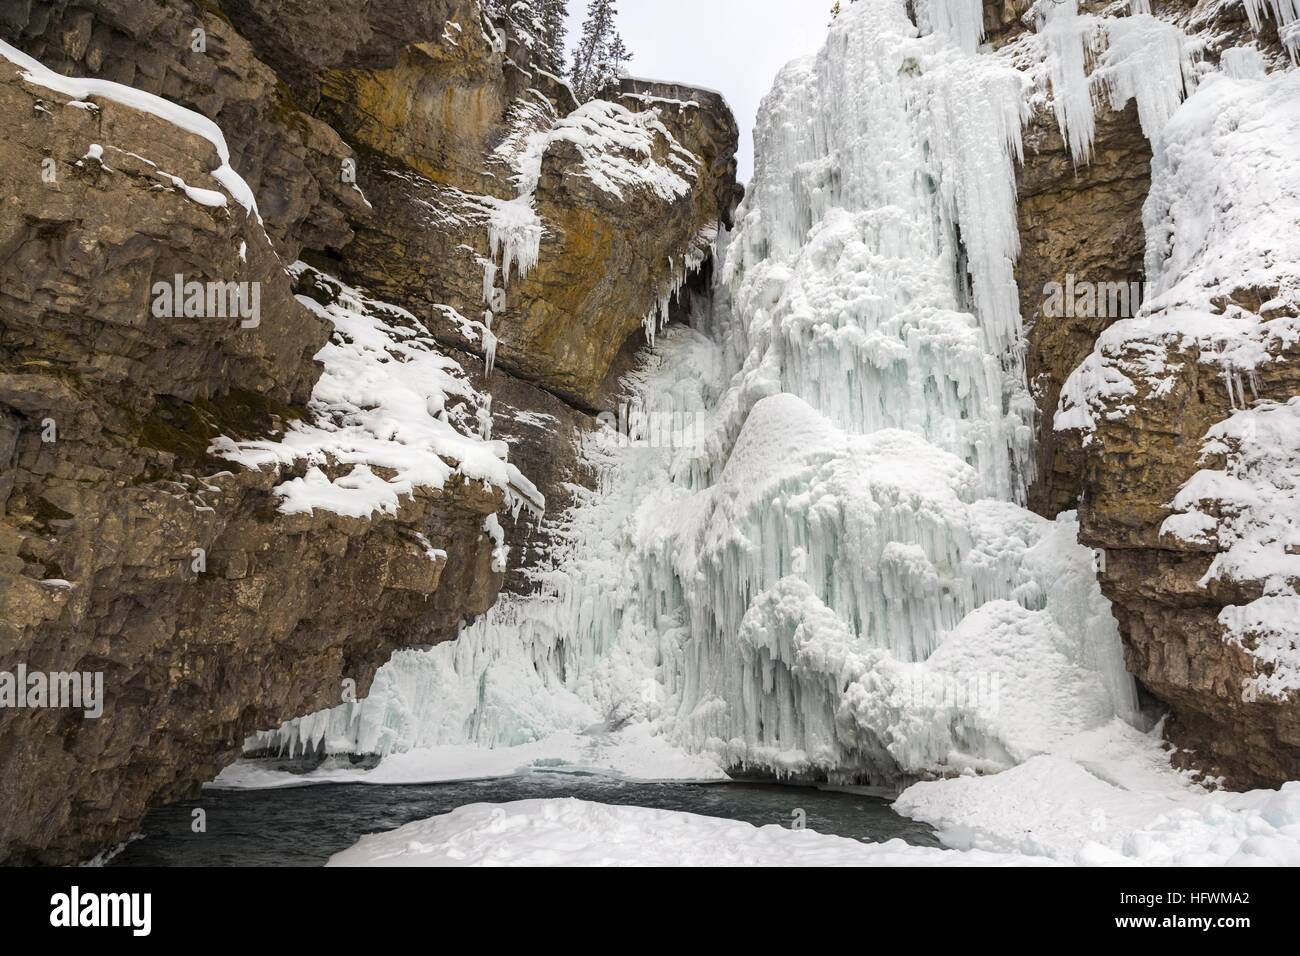 Frozen Ice Waterfall Famous Johnston Canyon Winter Landscape Scenic View. Banff National Park Rocky Mountains Alberta Canada Stock Photo